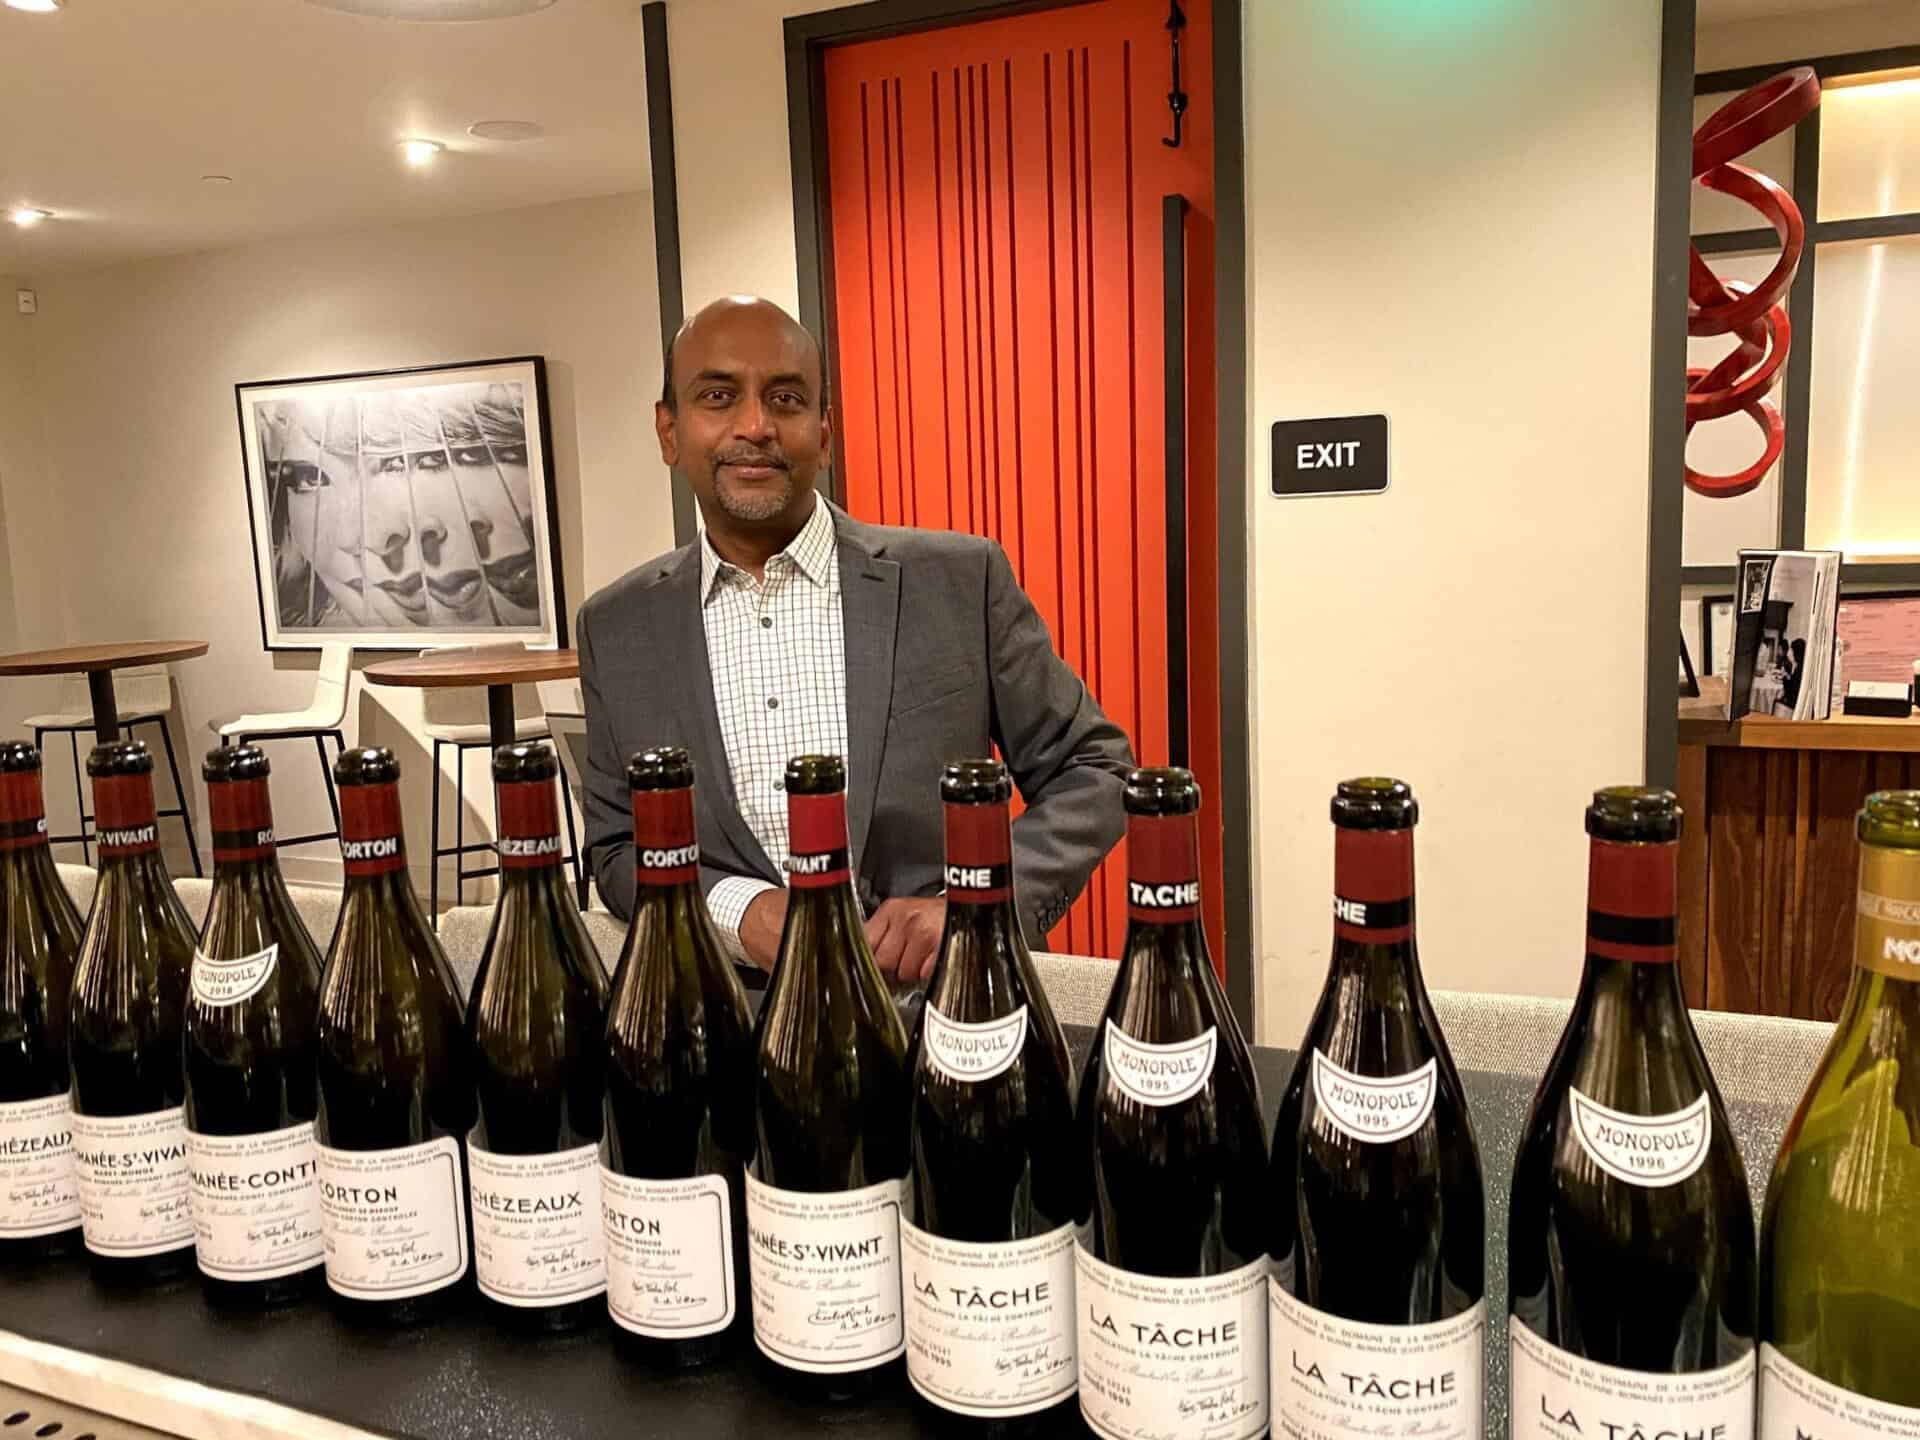 Krishna Tamanna. The Wine Geeks of Silicon Valley. HT Media. Mint Lounge